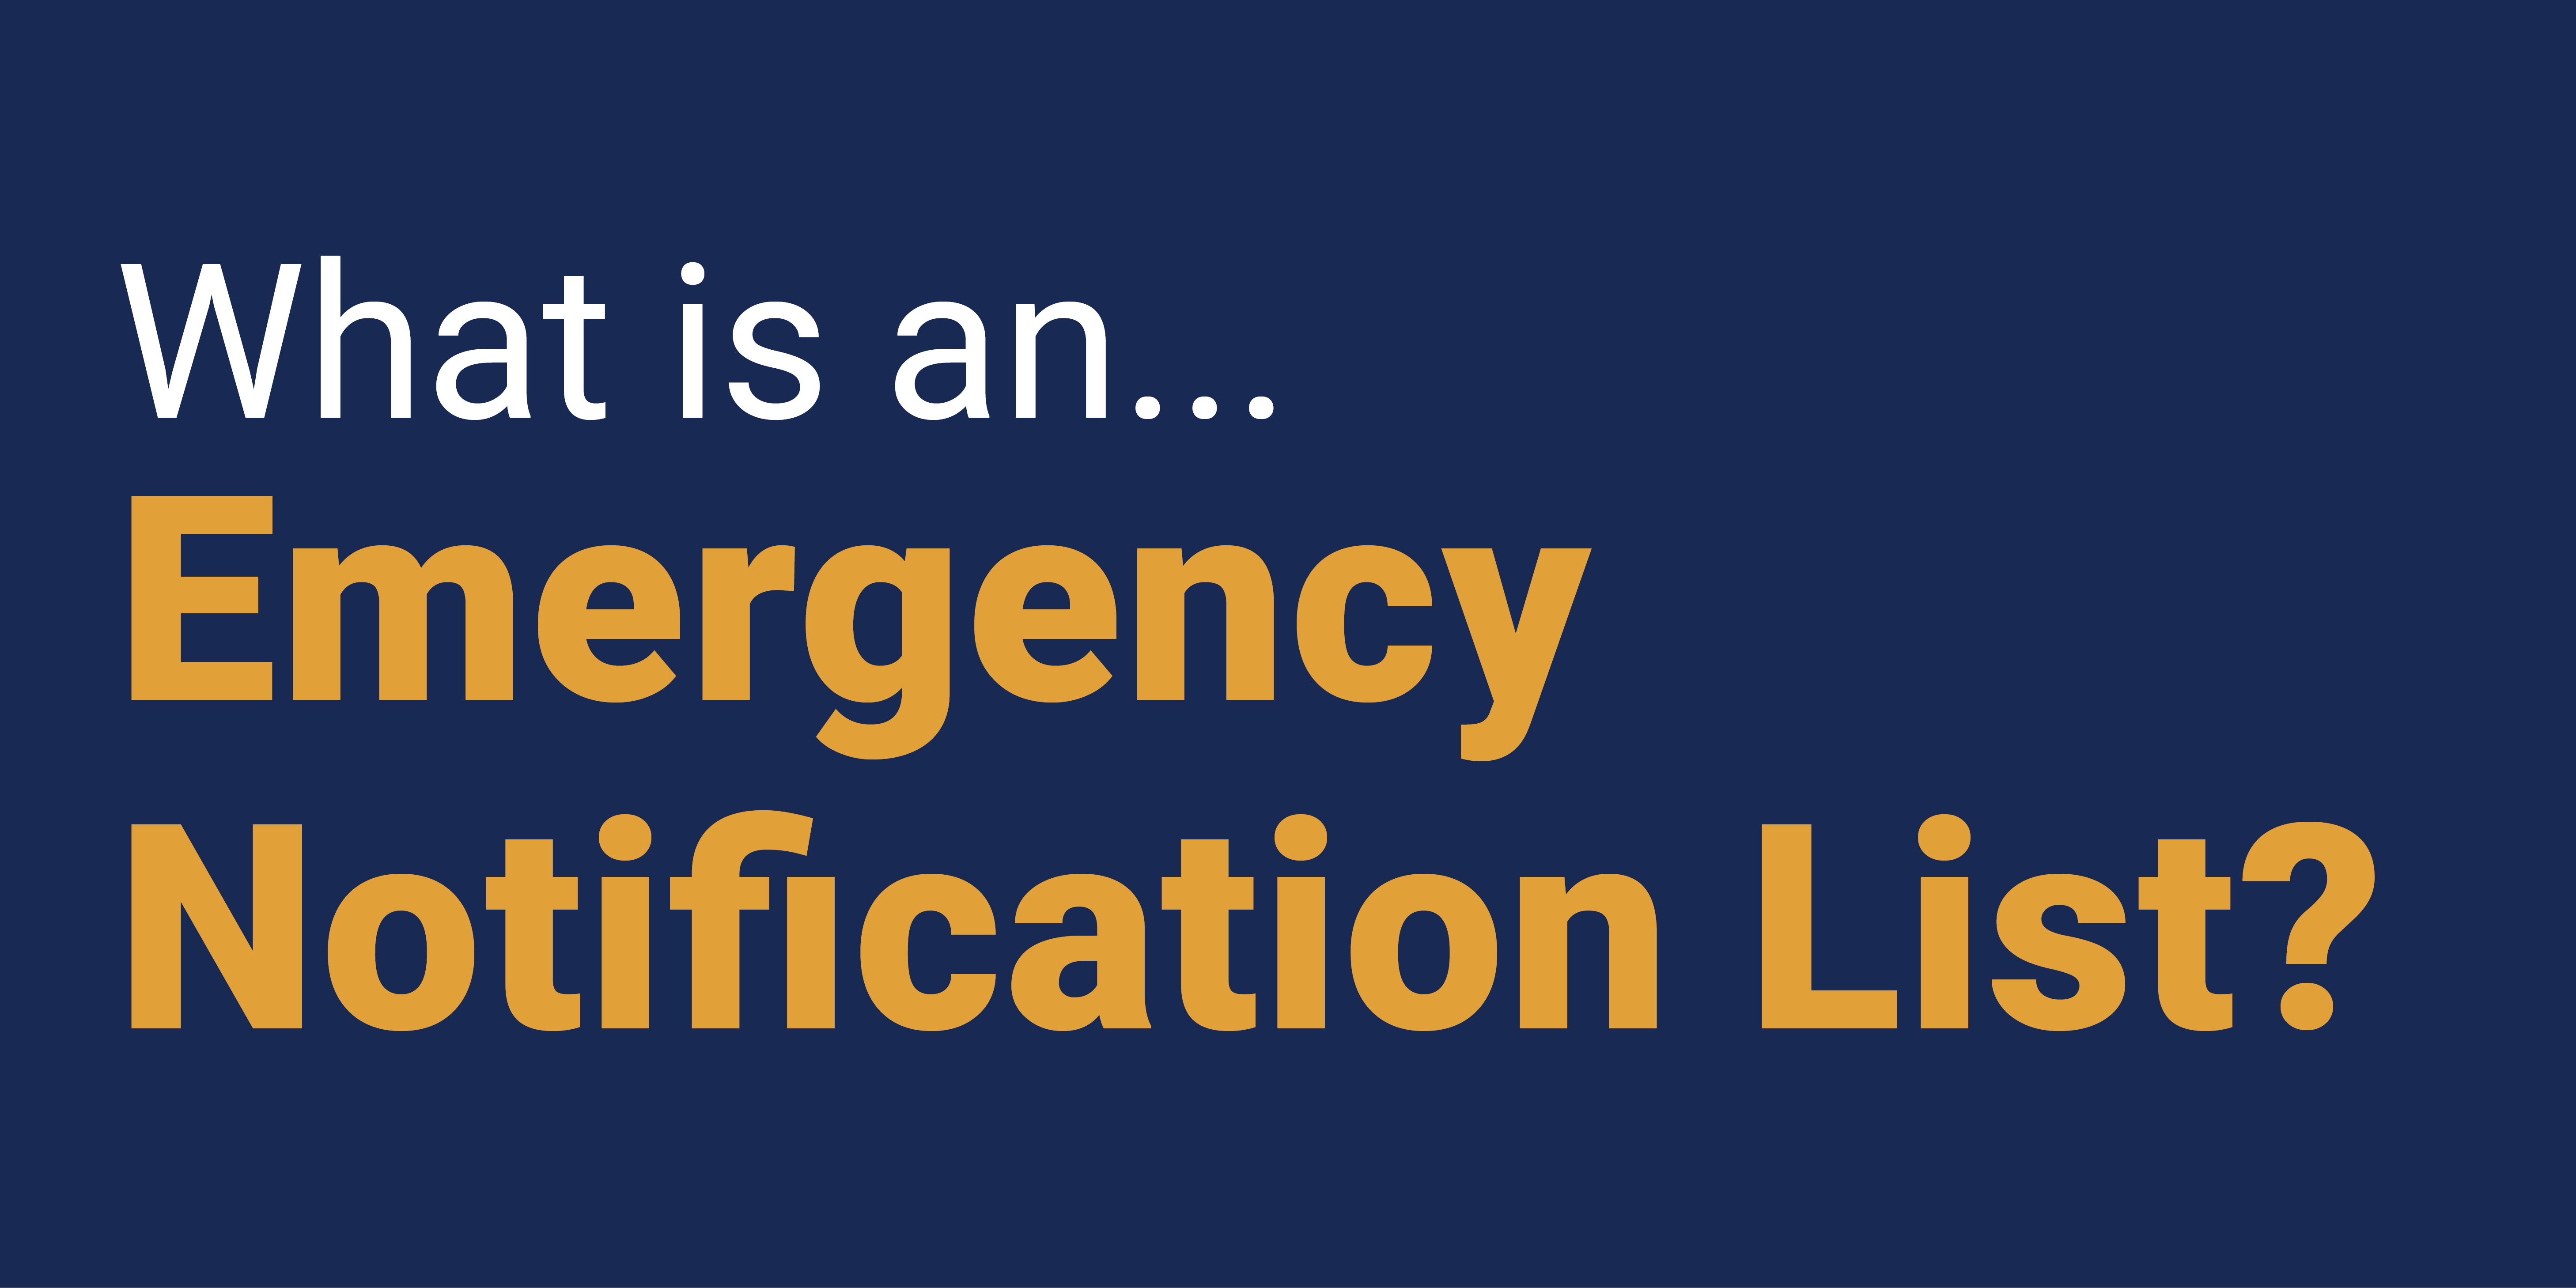 What is an Emergency Notification List?